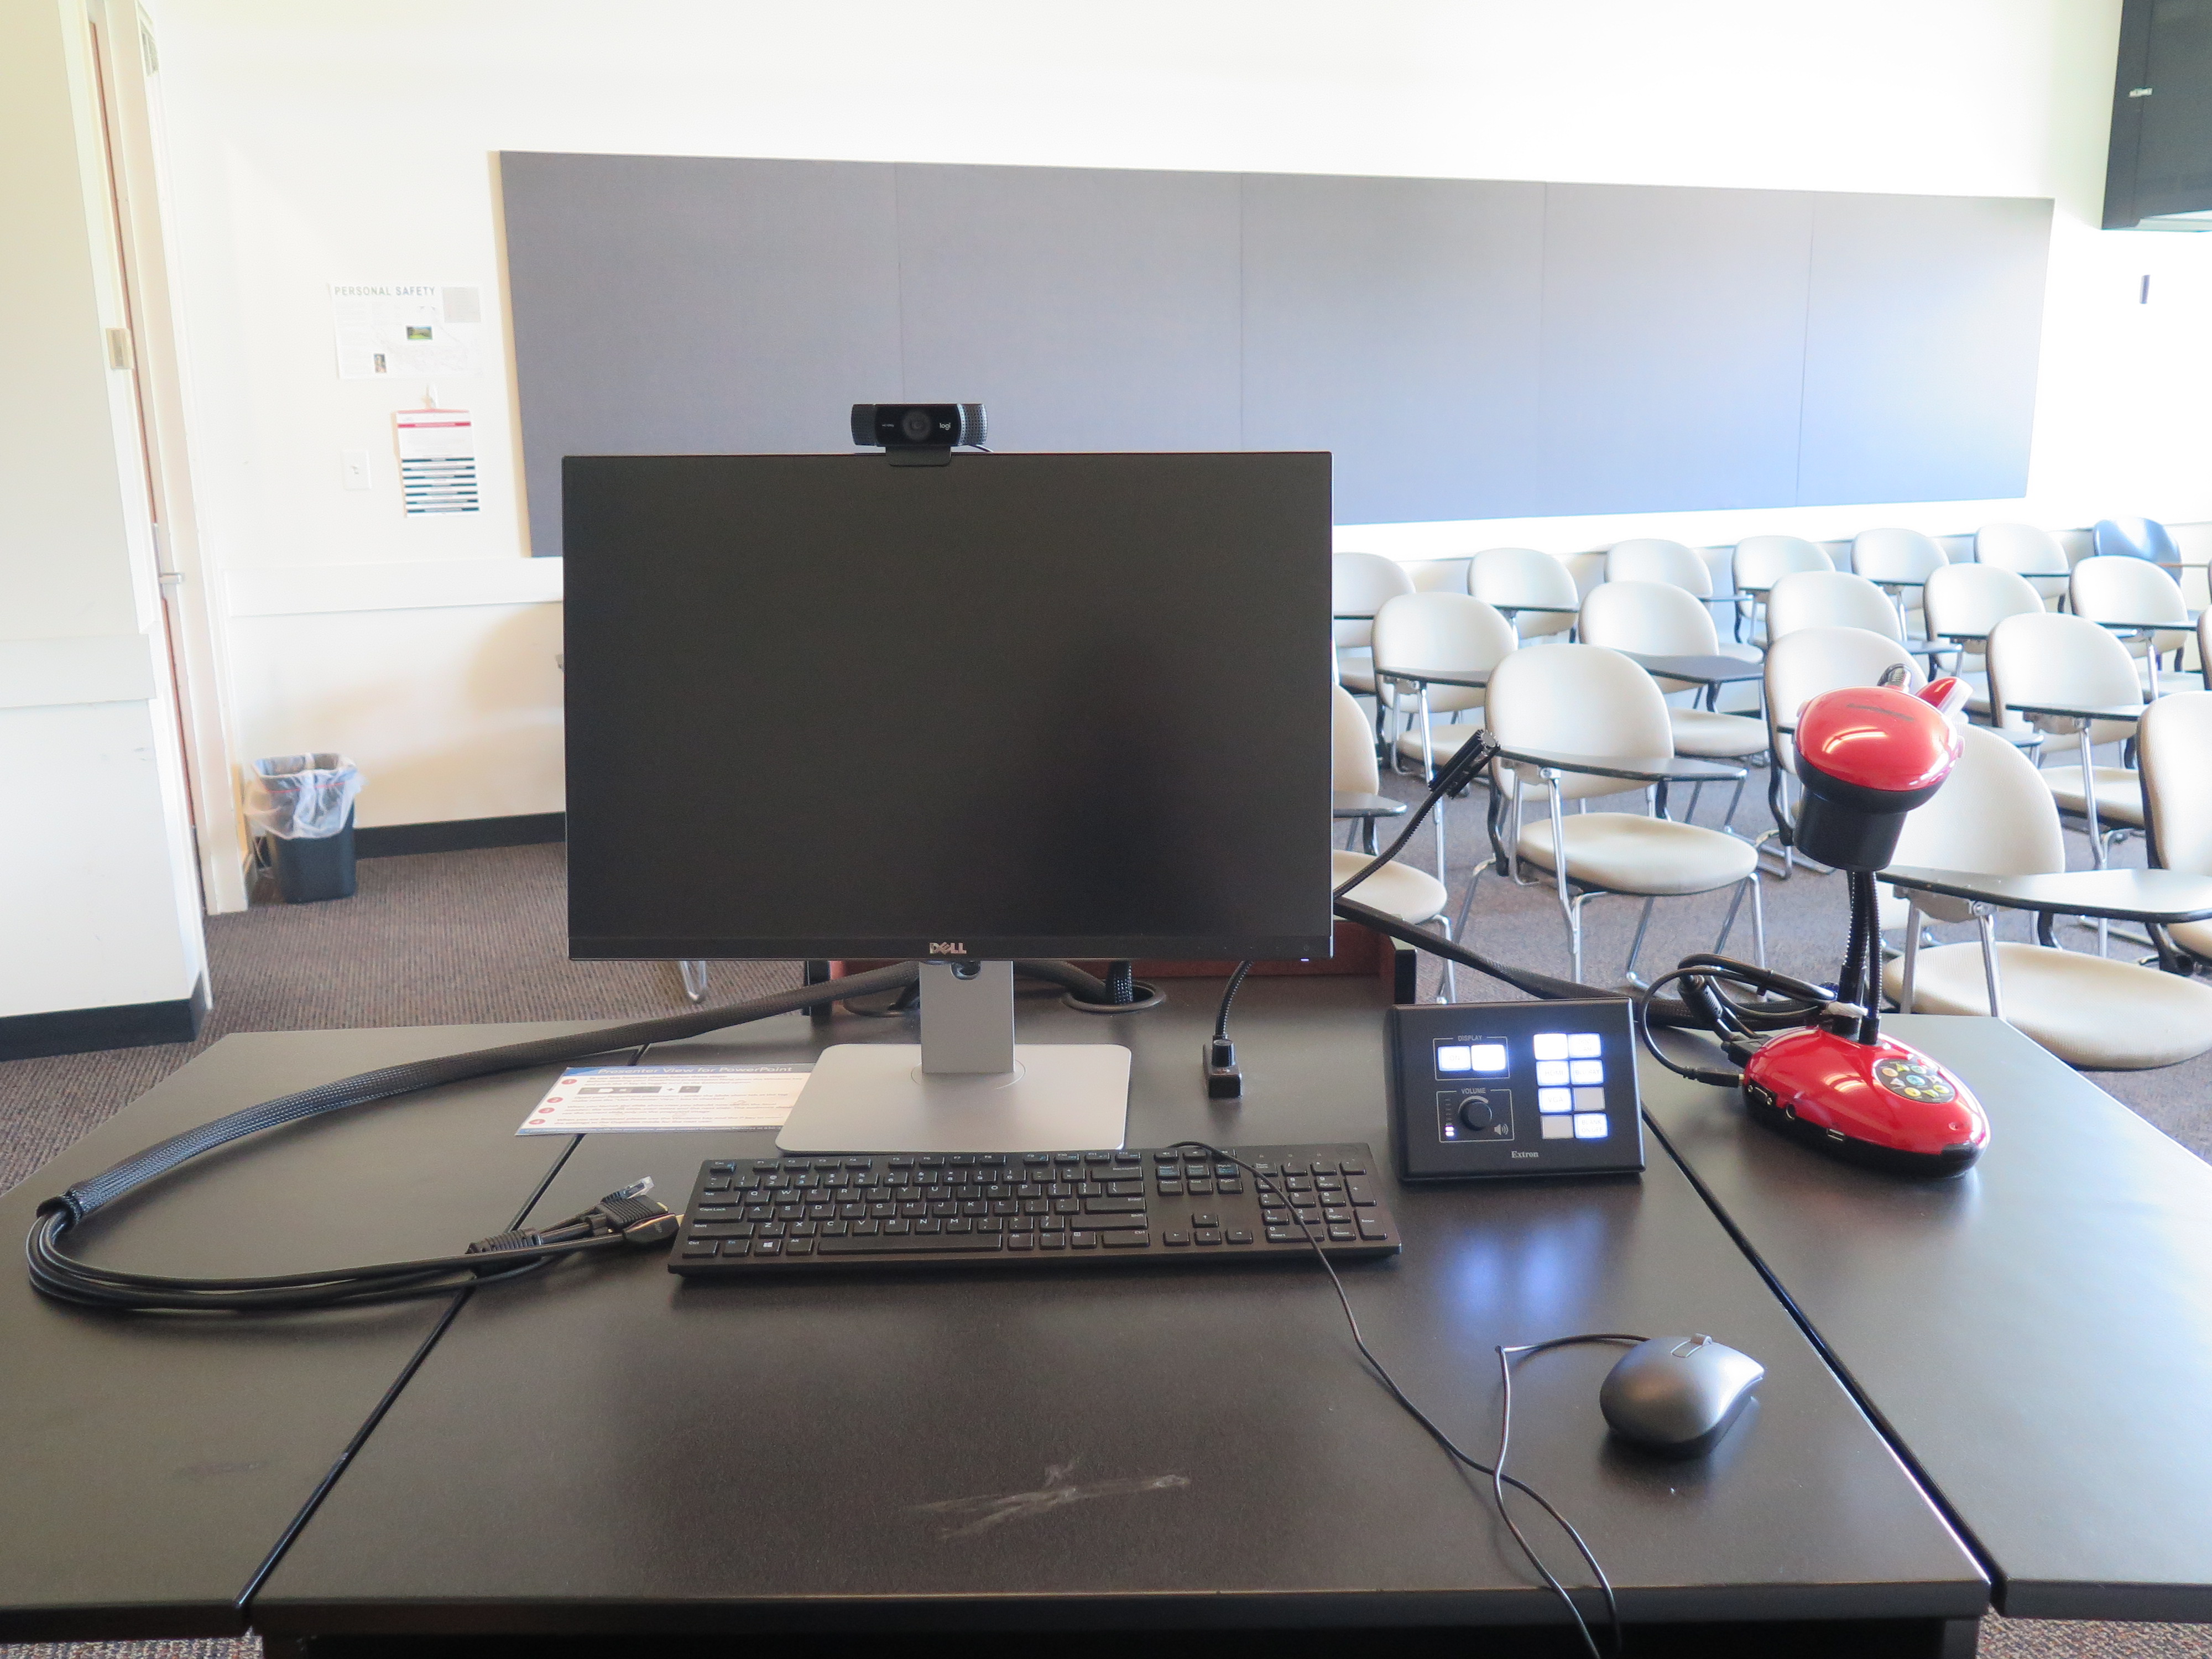 On top of podium is Logitech 920 webcam, Dell computer monitor, AV push button controller, and Lumens Ladybug document camera.